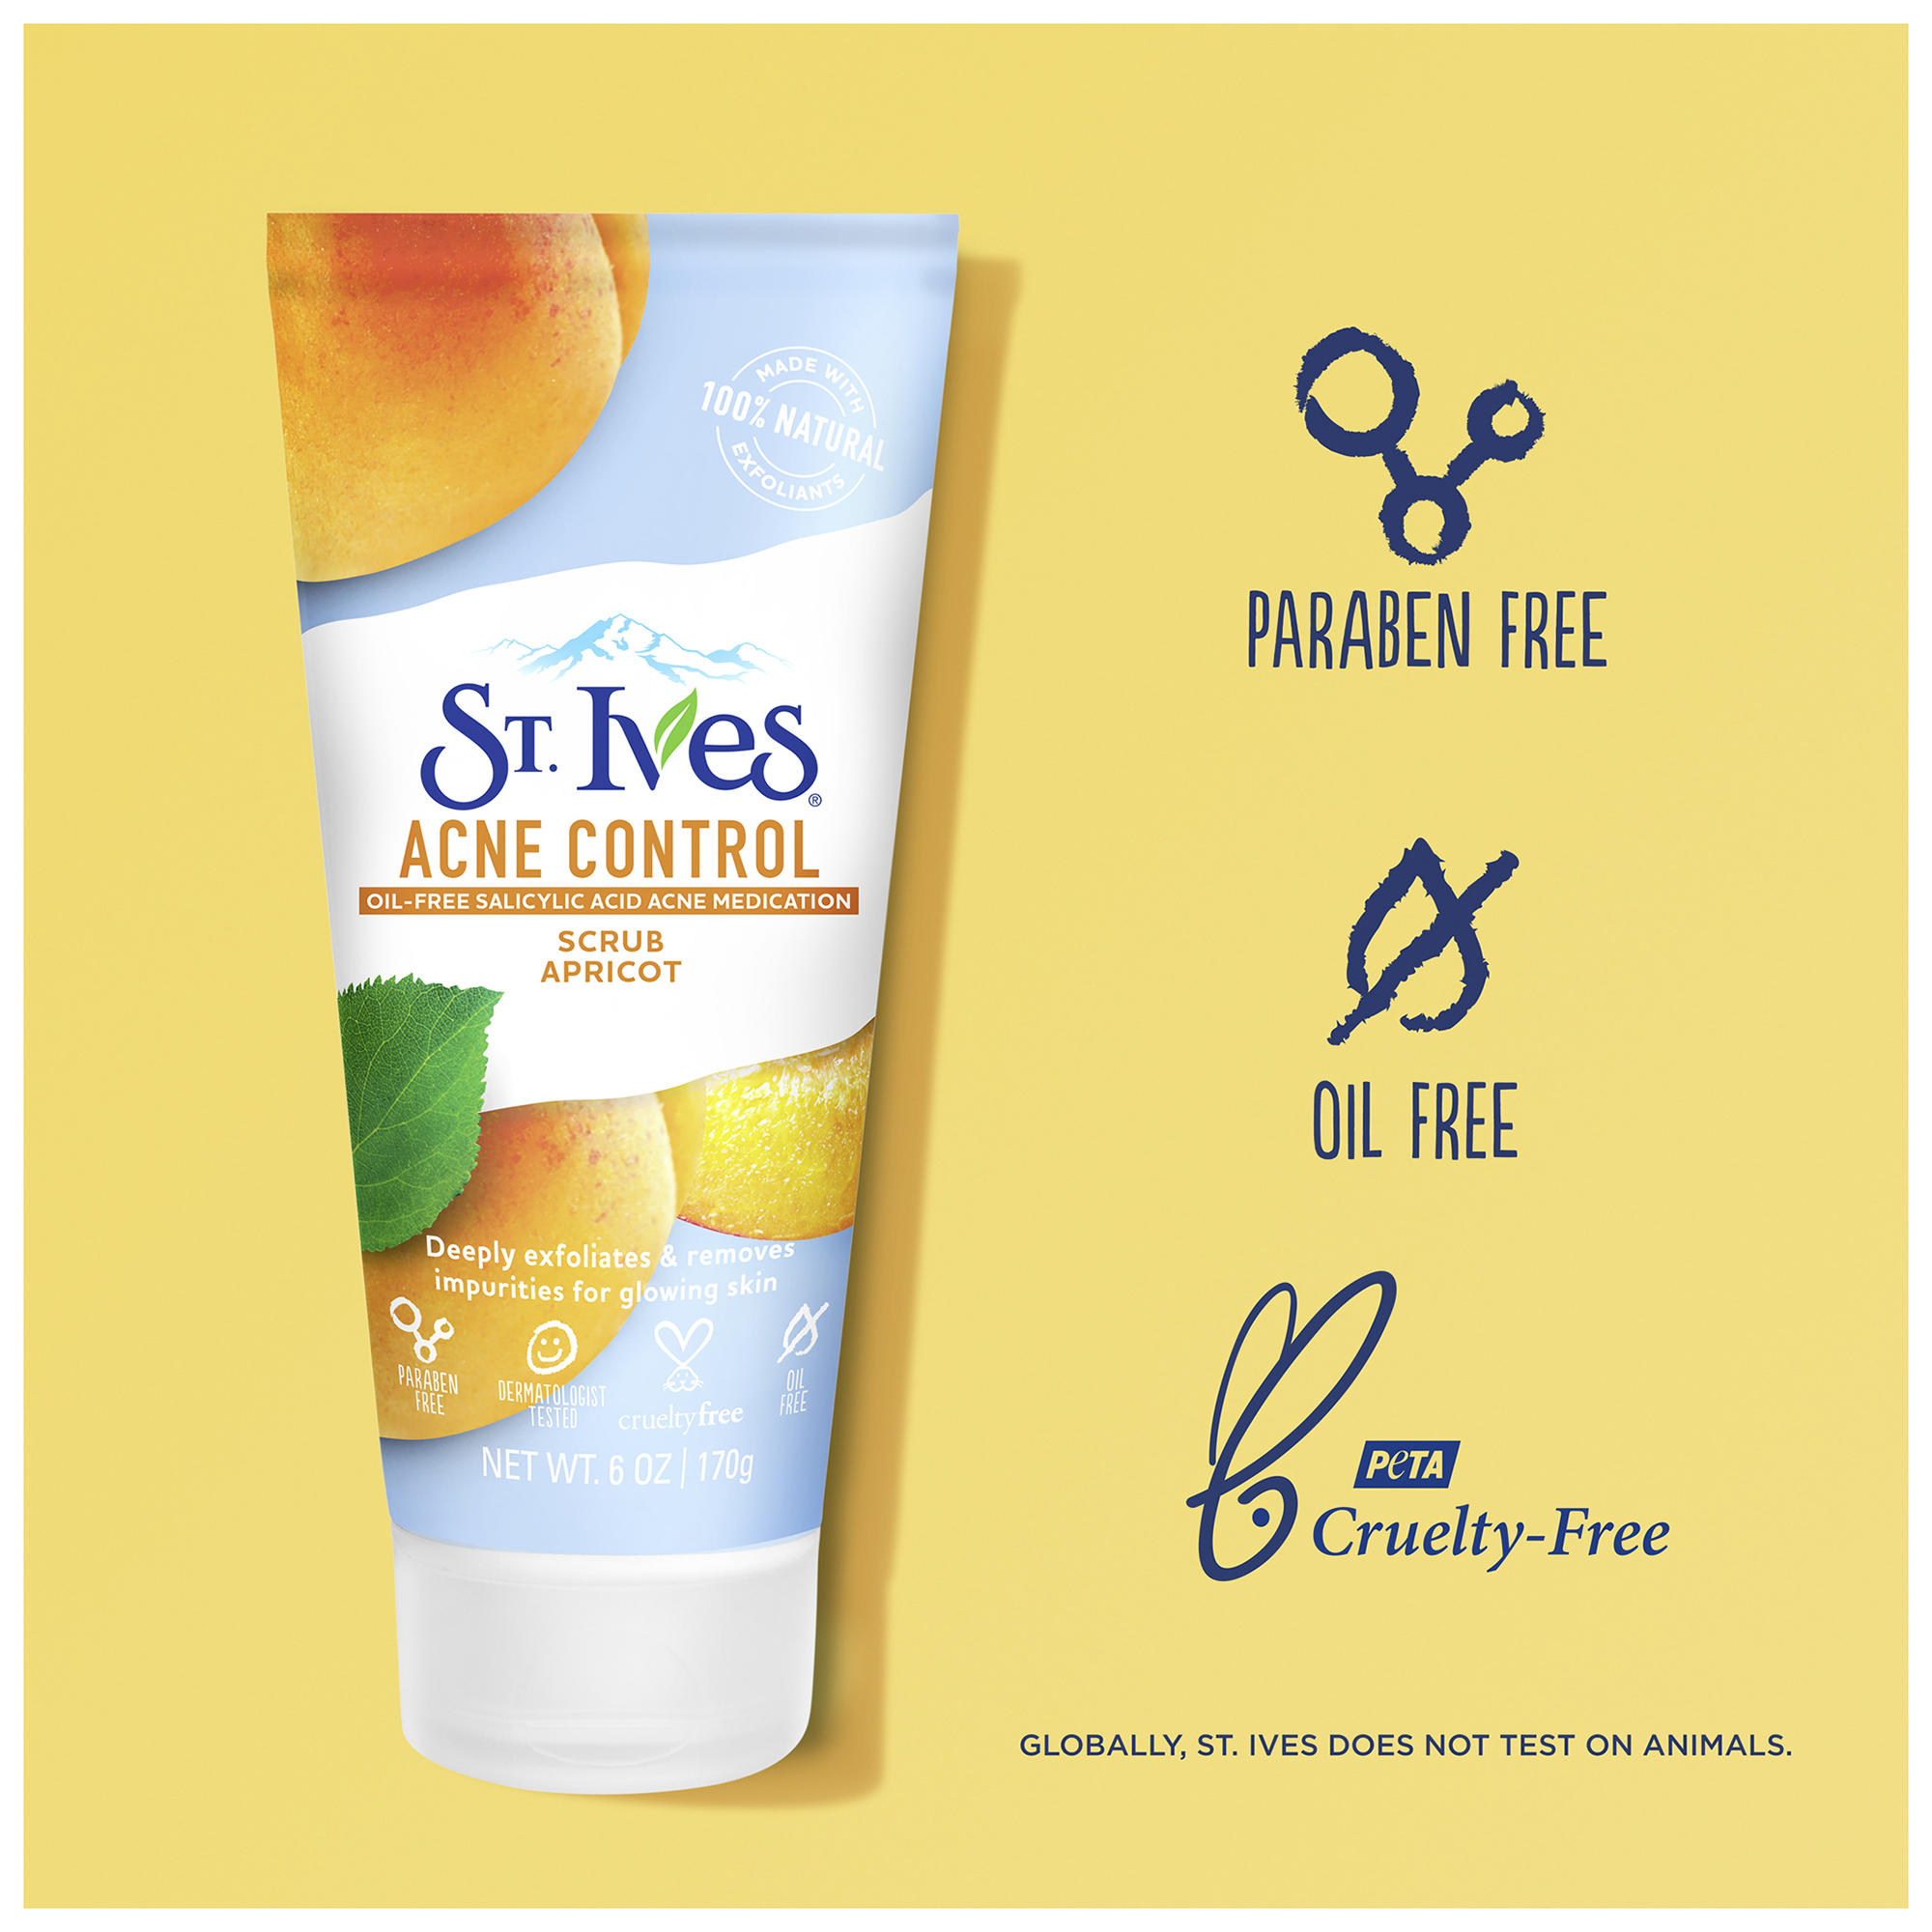 St. Ives Acne Control Apricot Face Scrub, 6 oz - image 8 of 13